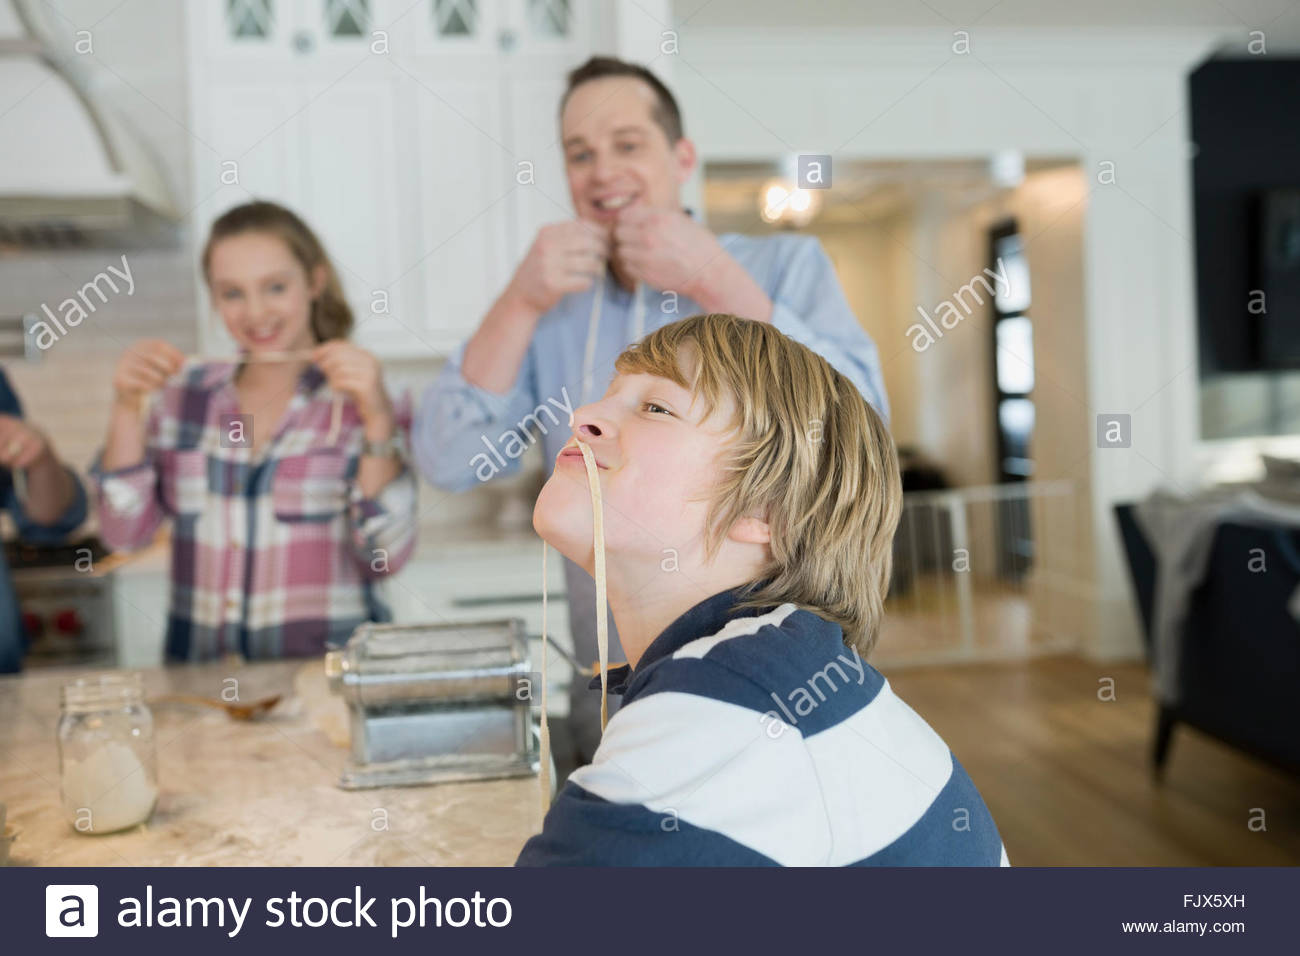 Playful boy with long noodle mustache in kitchen Stock Photo